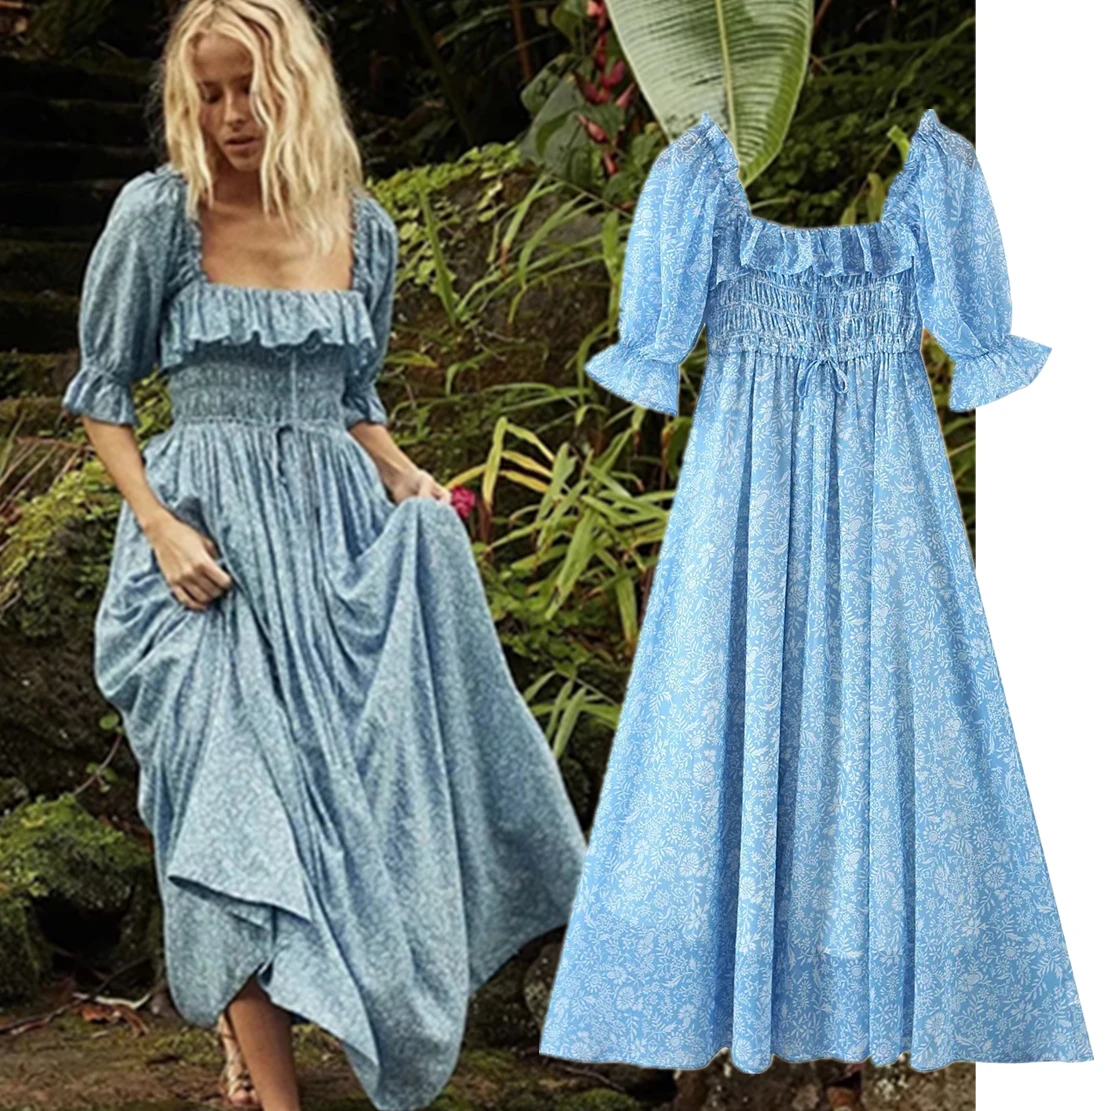 

Withered Indie Folk Bohemian Style Vintage Square Collar Print Maxi Dress Women Ruffles Cascading Floral Beach Dress